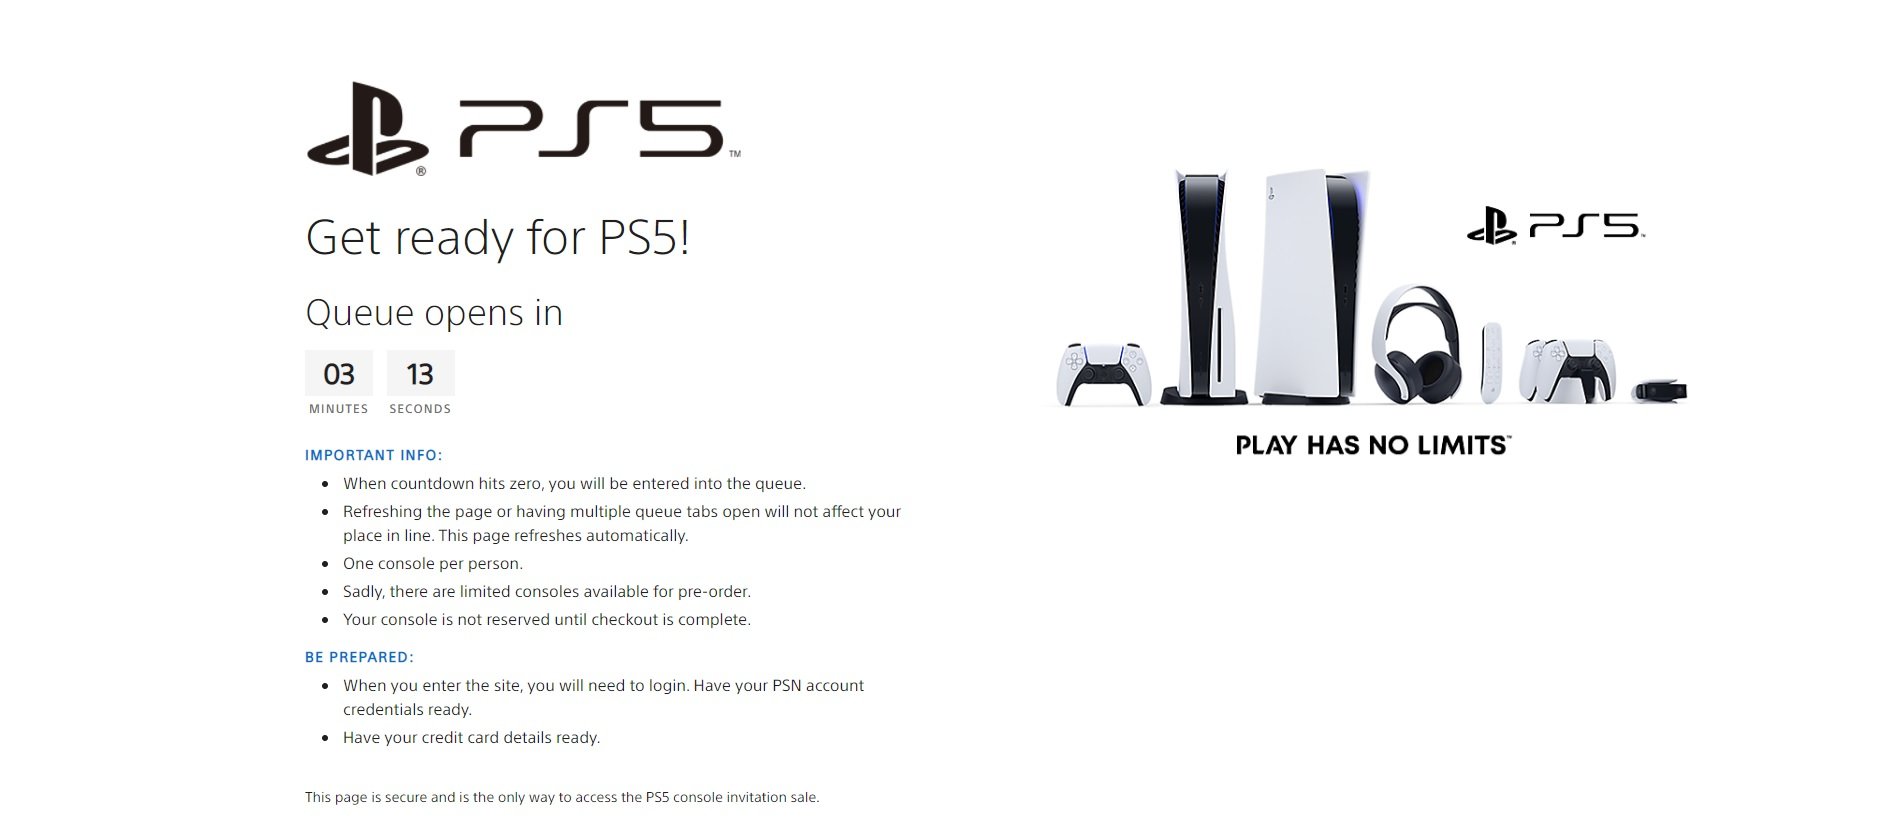 PS5 Slim stock UK - PlayStation 5 console deals, sales, pre-orders